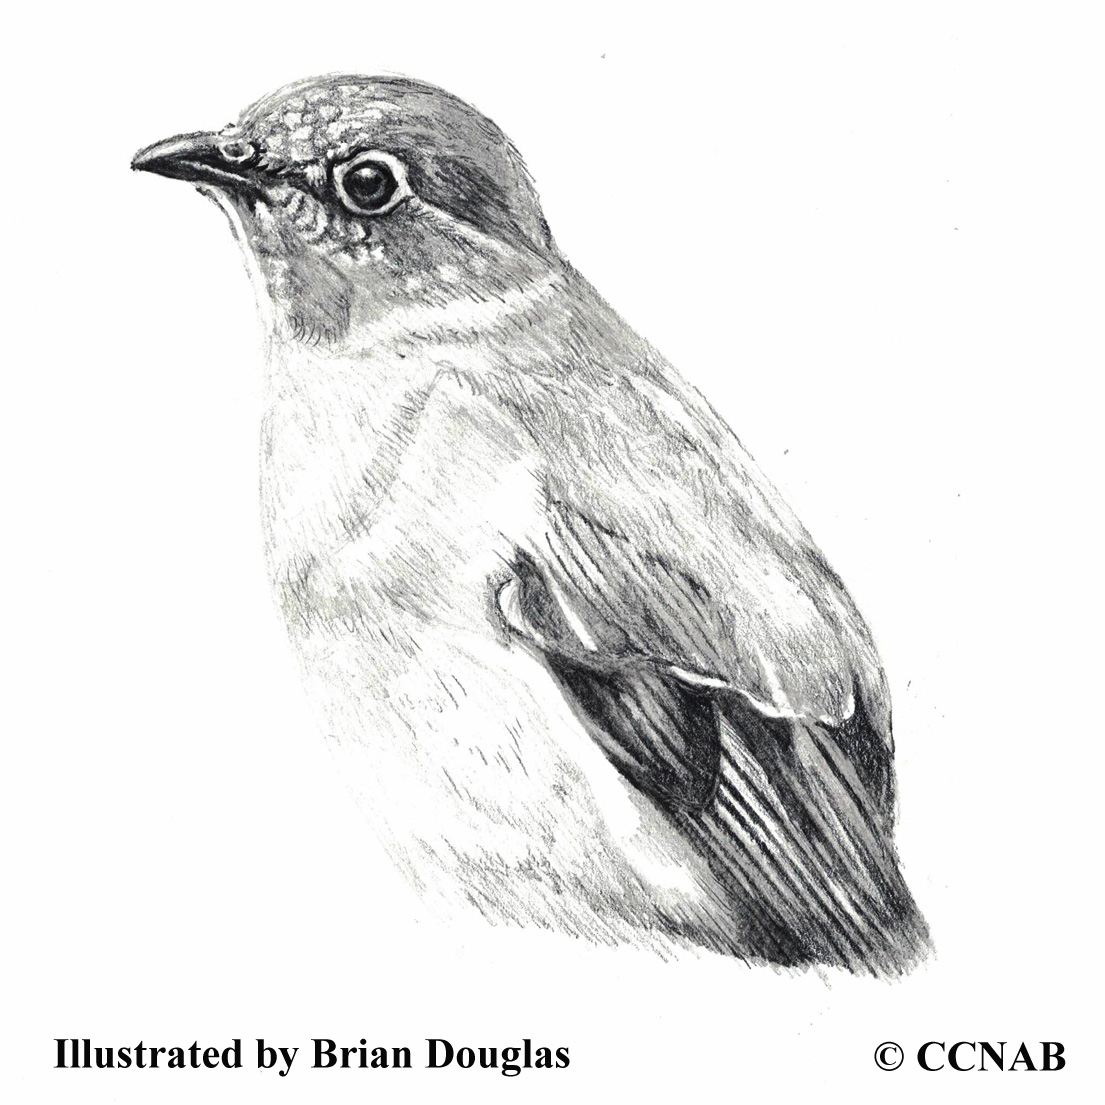 Townsend's Solitaire, picture of solitaire